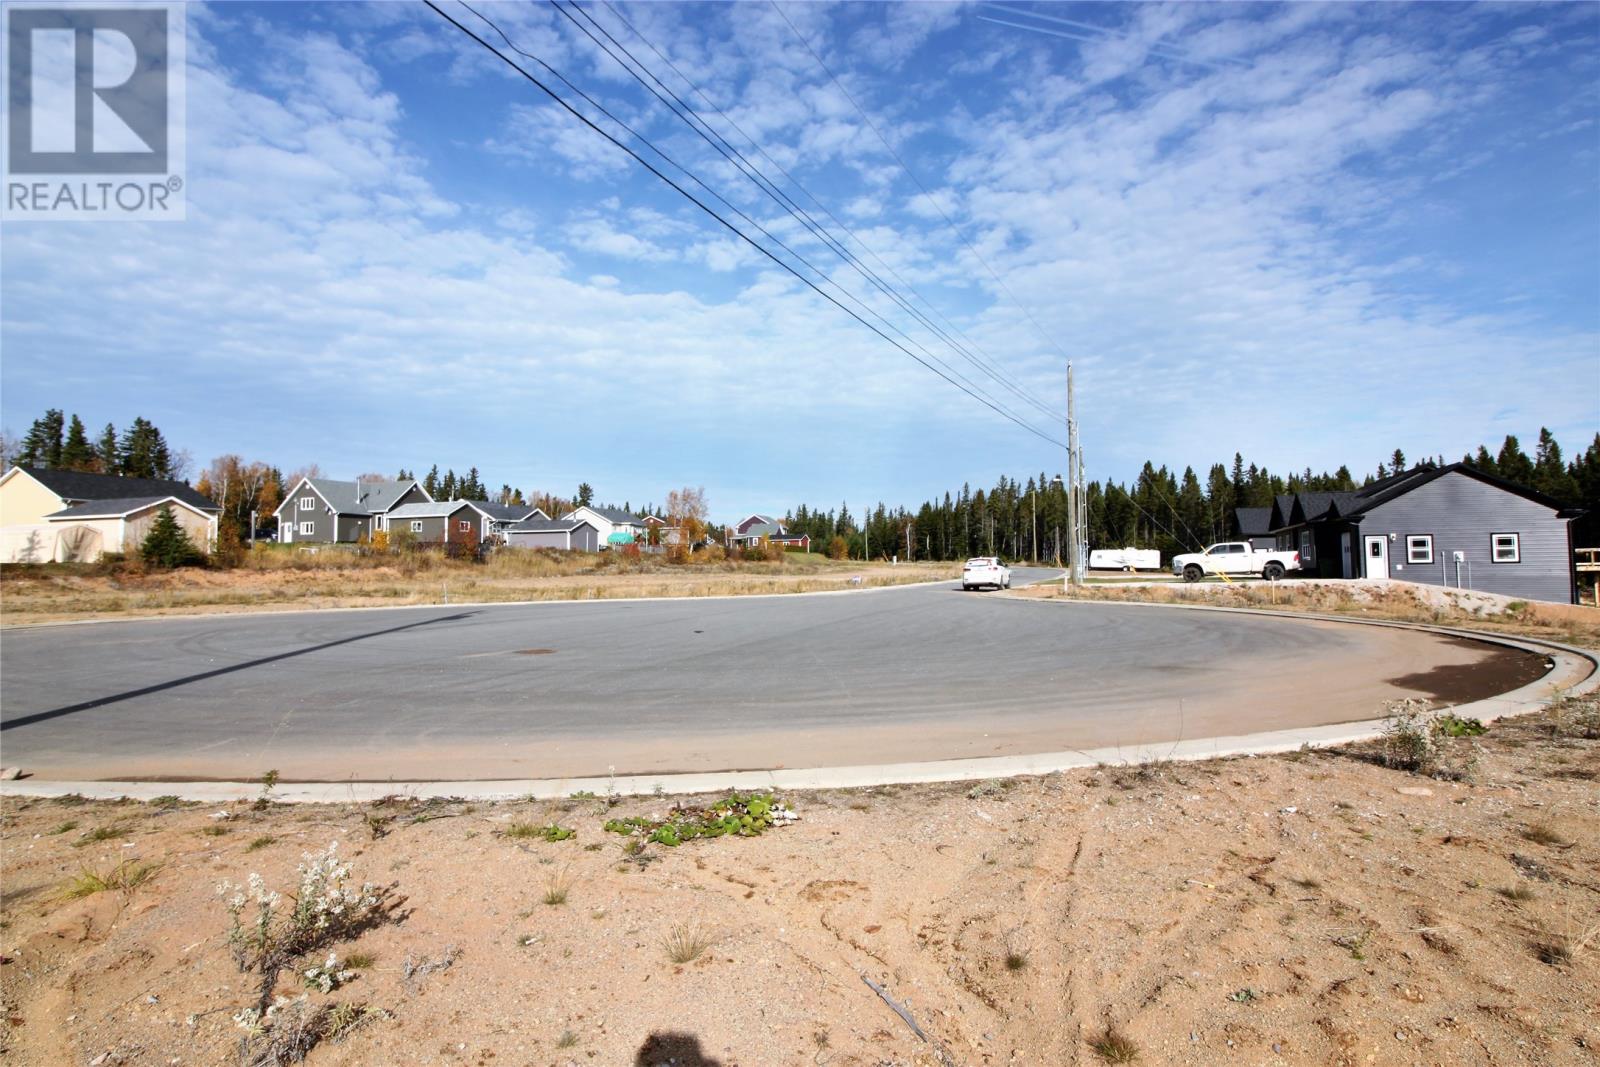 LOT 10 Stella's Place, Deer Lake, A8A3K4, ,Vacant land,For sale,Stella's,1266585